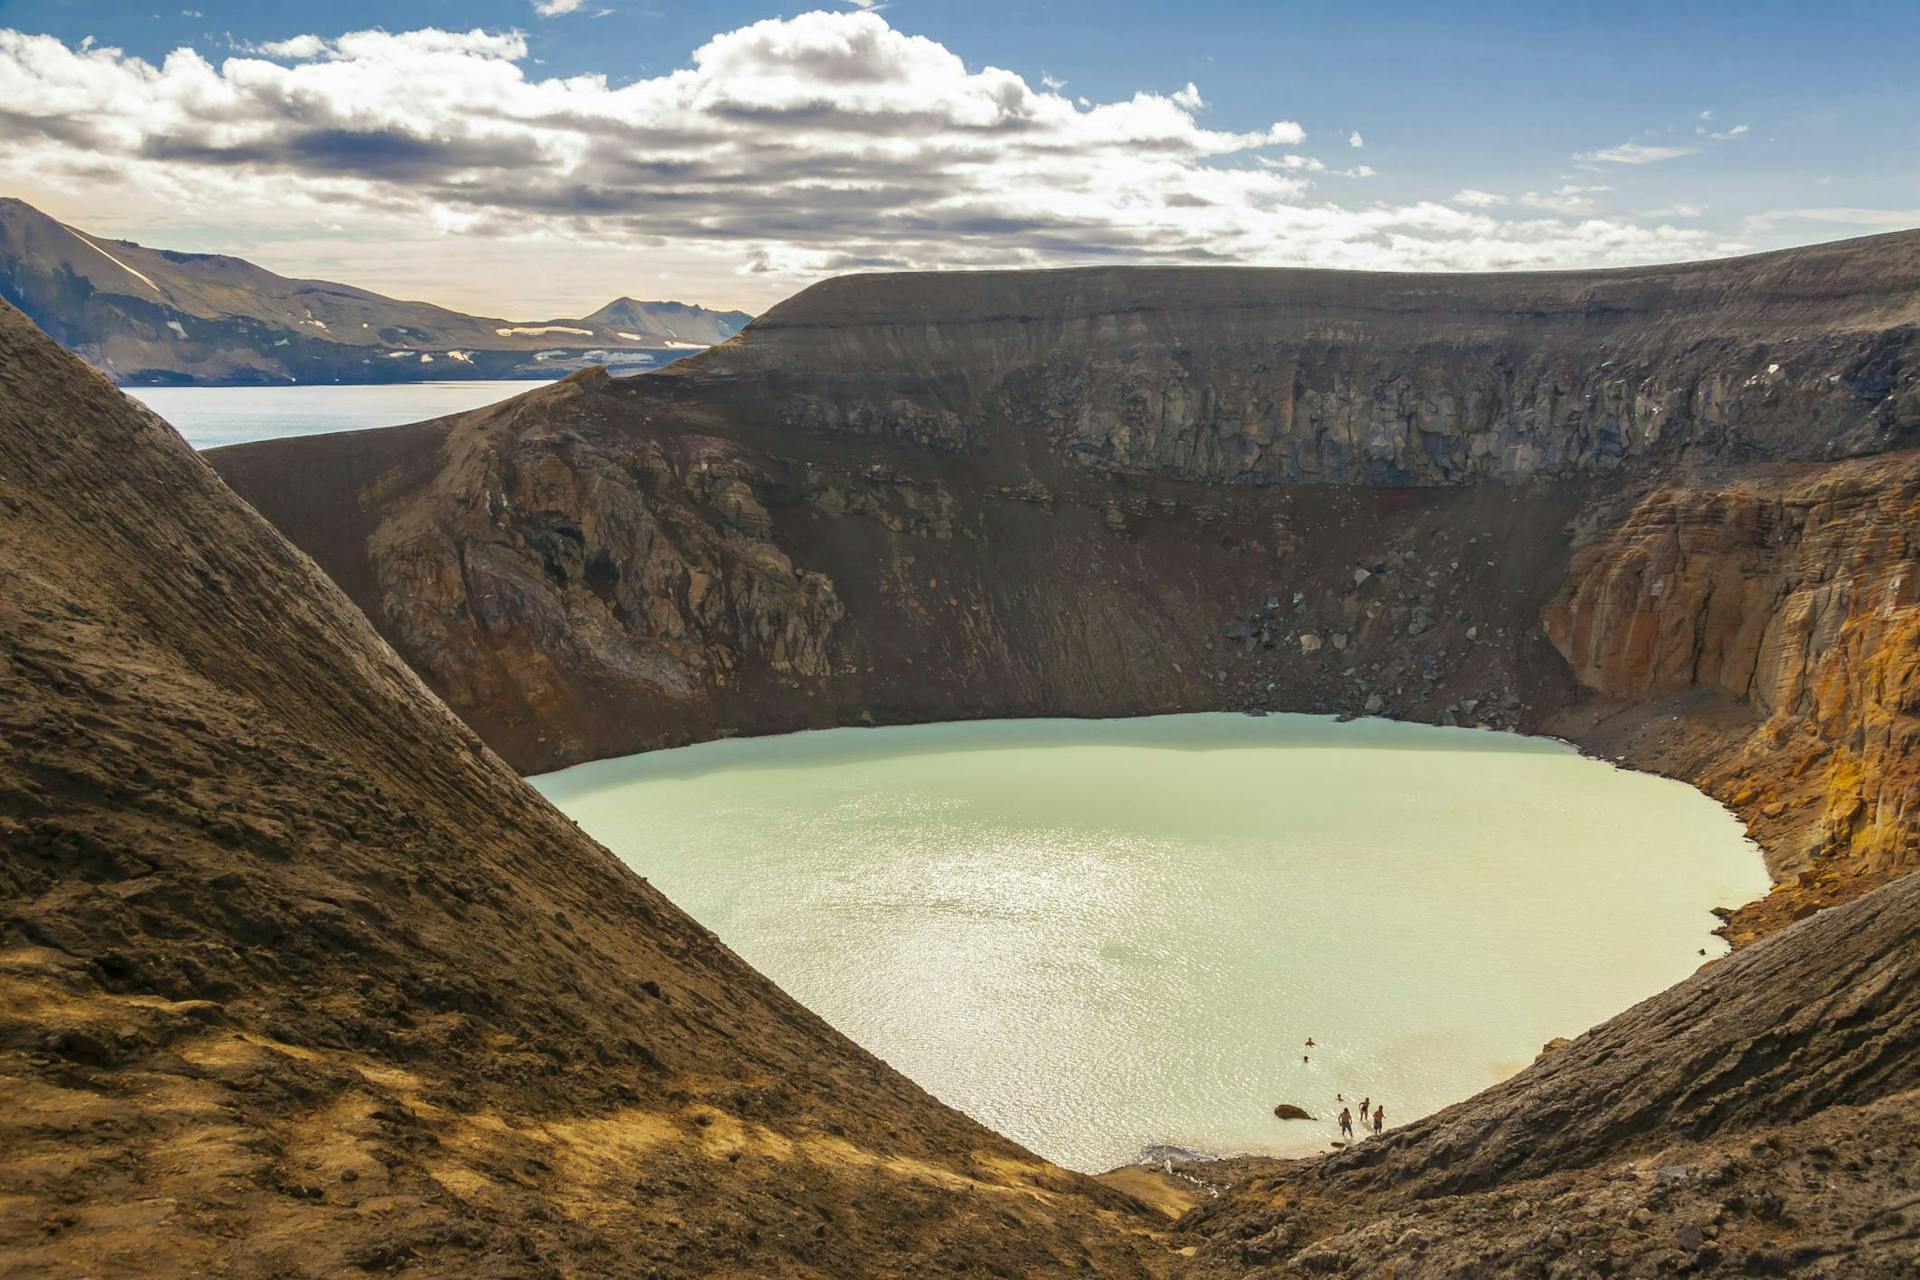 A crater filled with light blue water. 